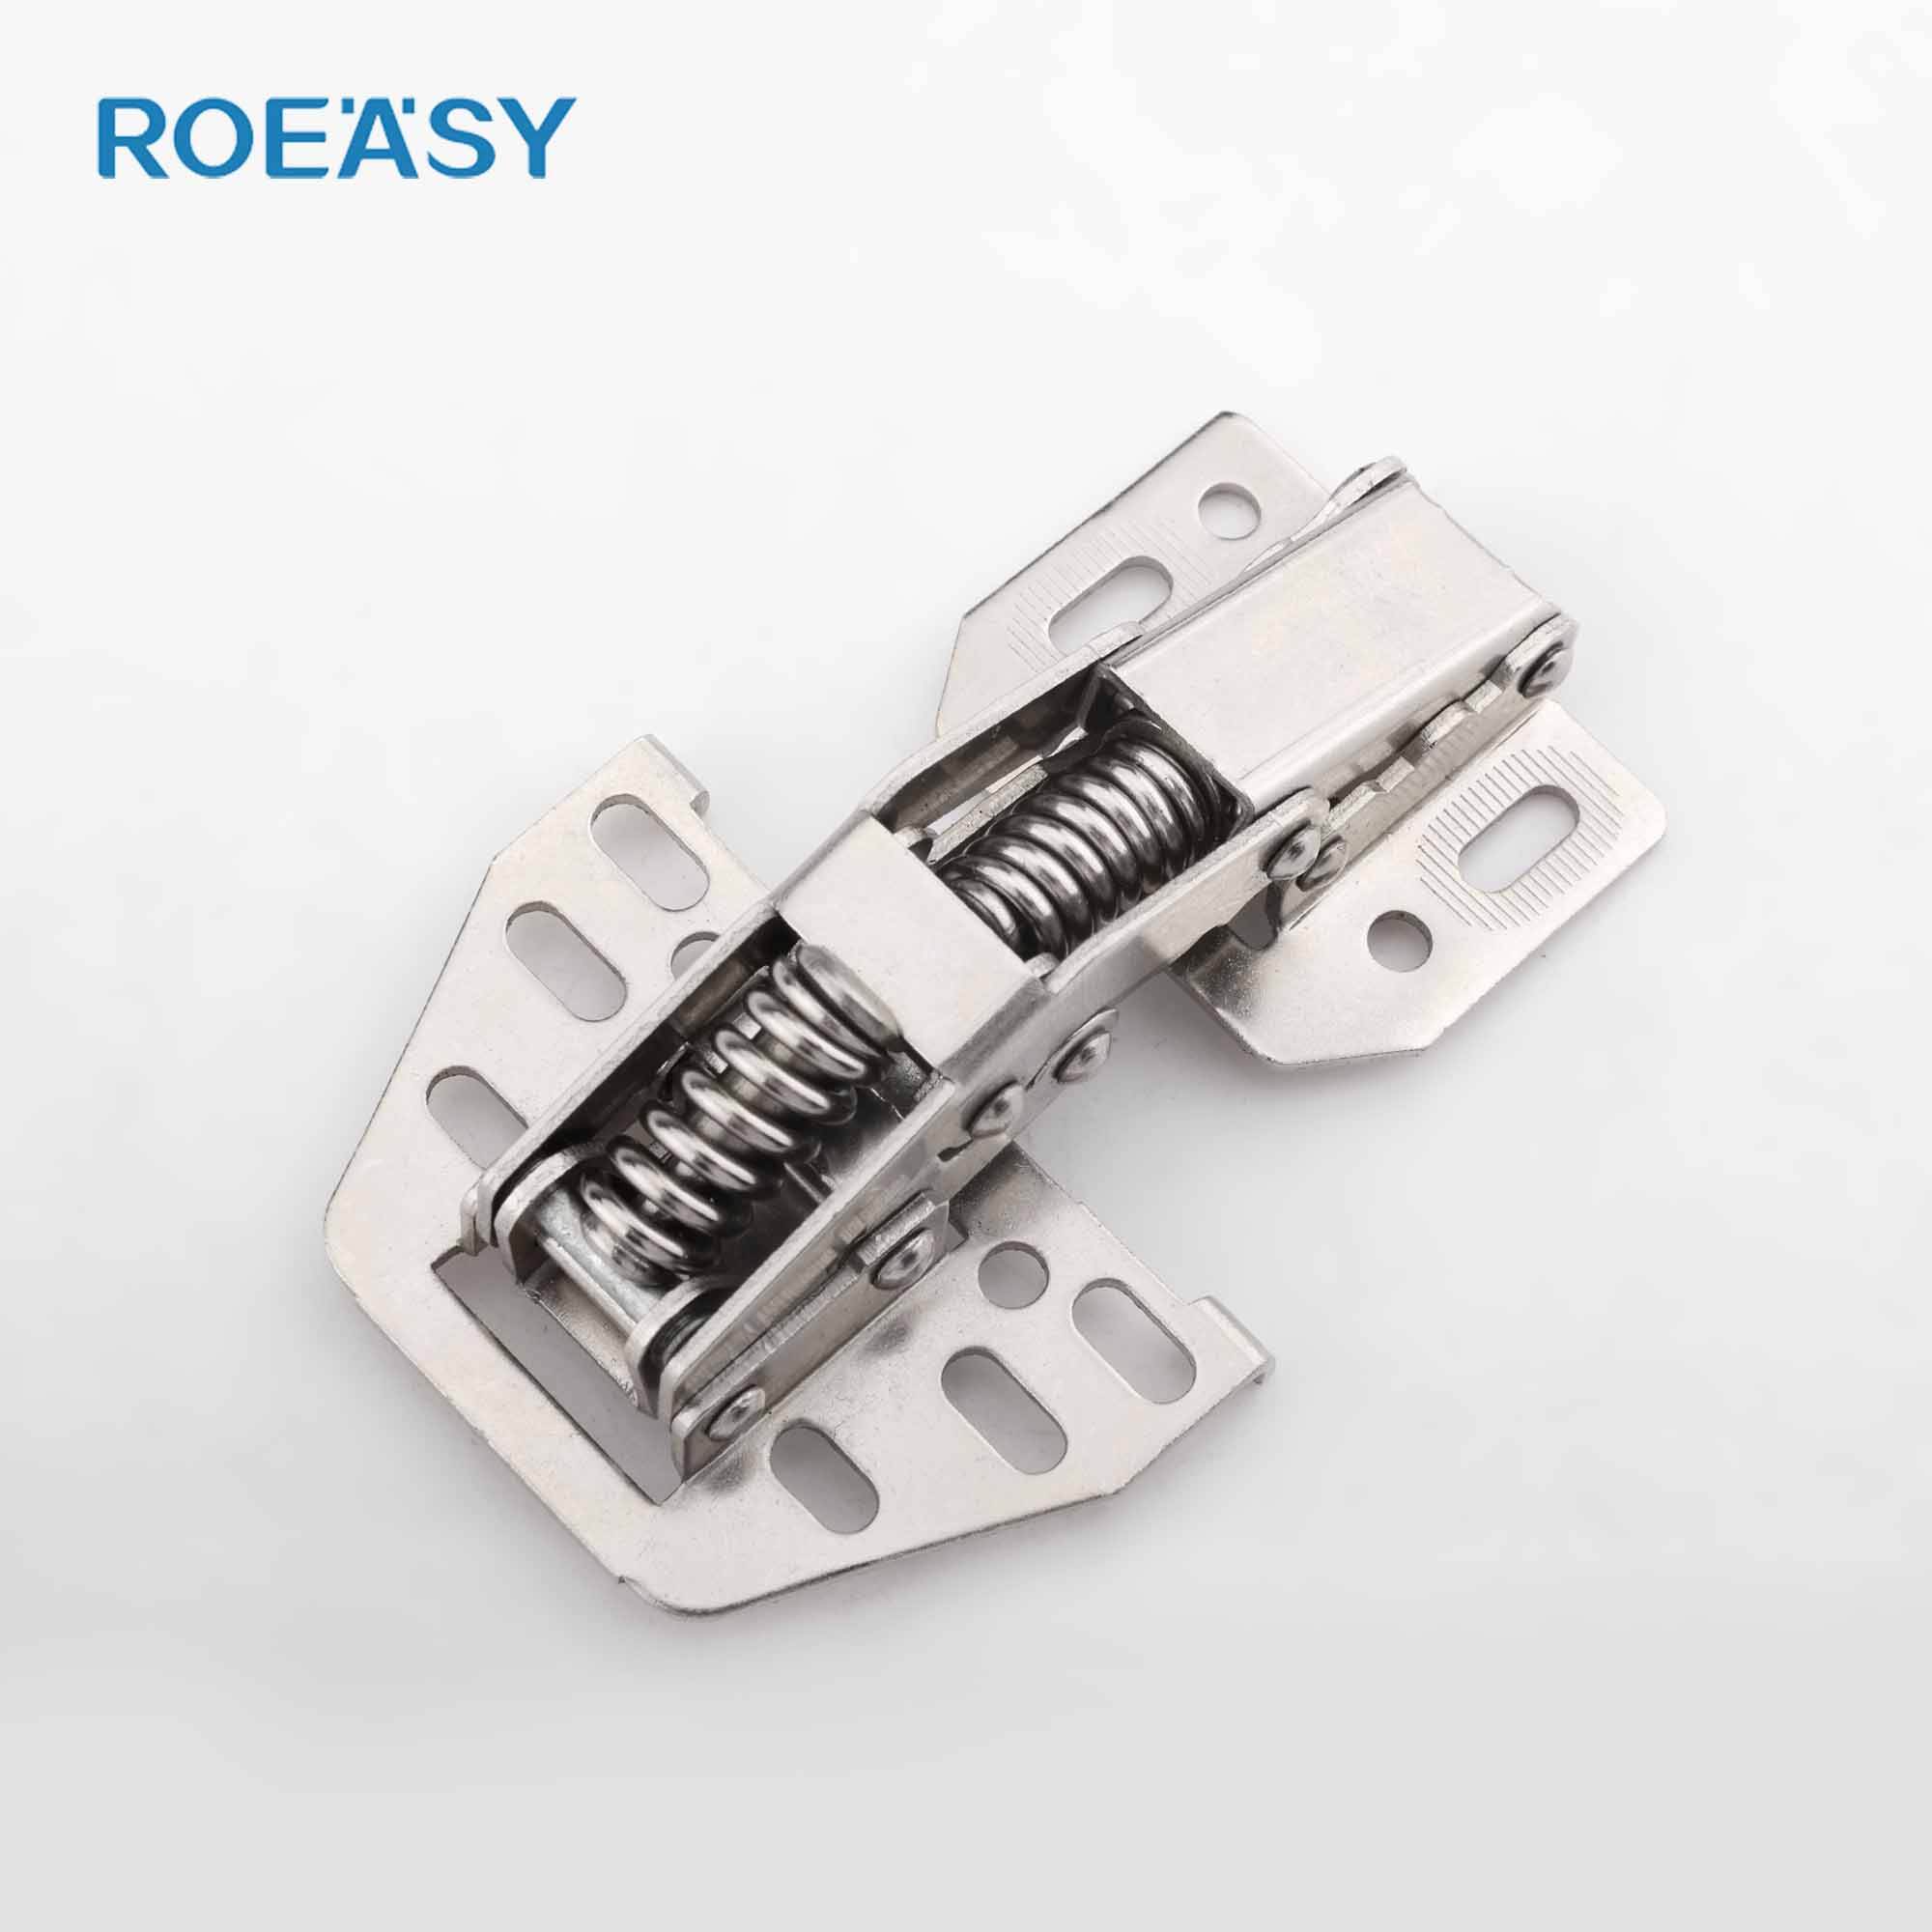 Roeasy FH-004 screw-in type 90 degree inseparable soft close cabinet spring hinge